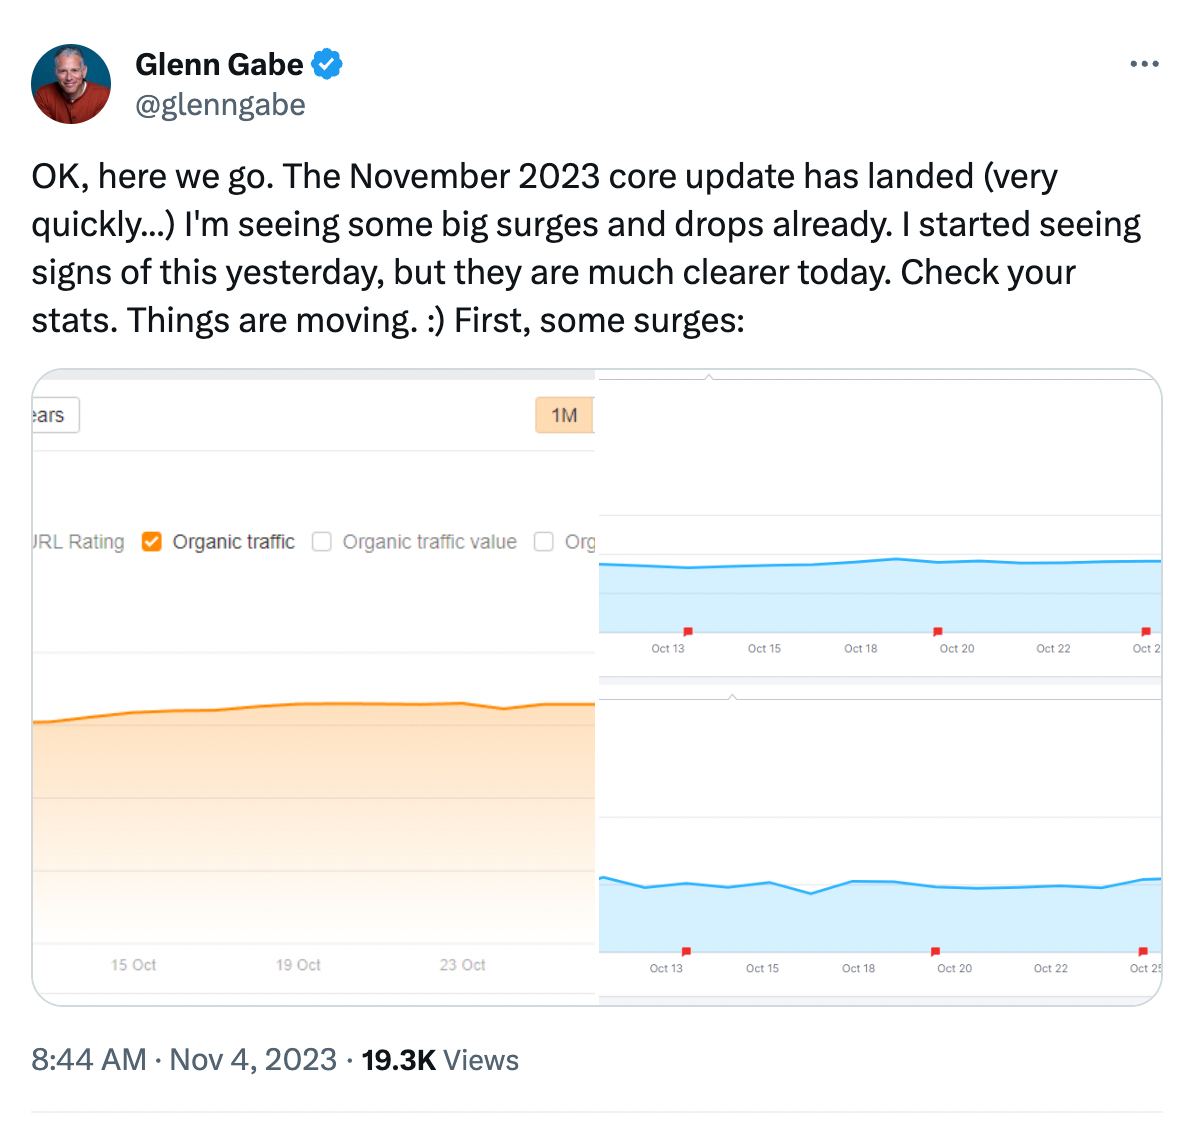 Glenn Babe on Twitter showing chart visual with spikes and drops in traffic from Google's core update